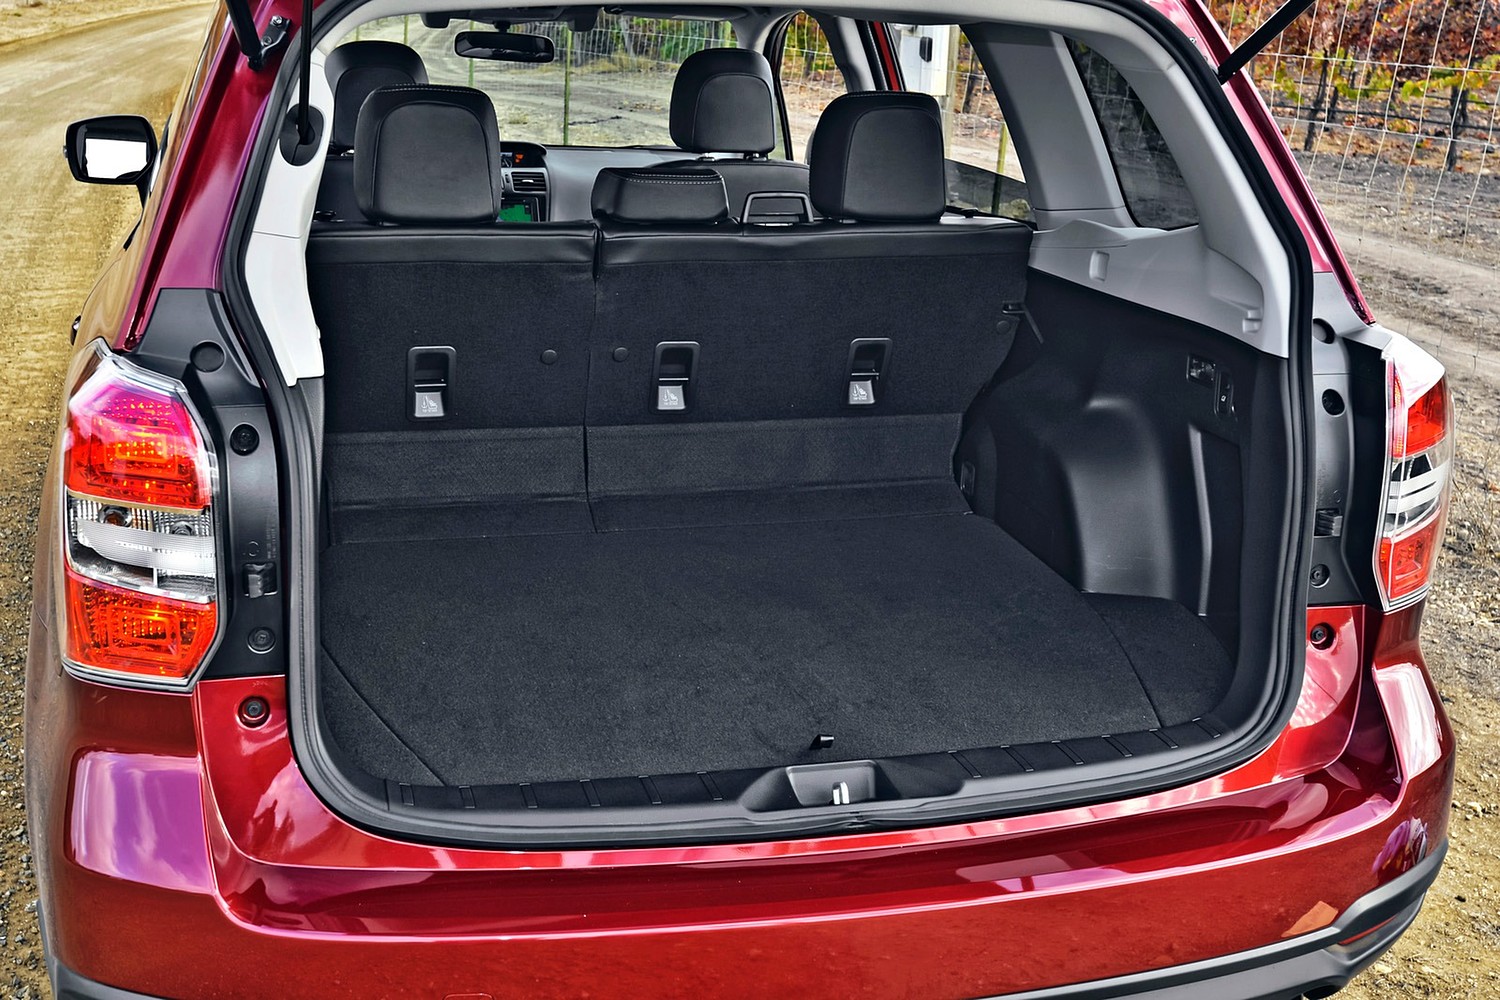 Subaru Forester 2.0XT Touring 4dr SUV Cargo Area (2015 model year shown)